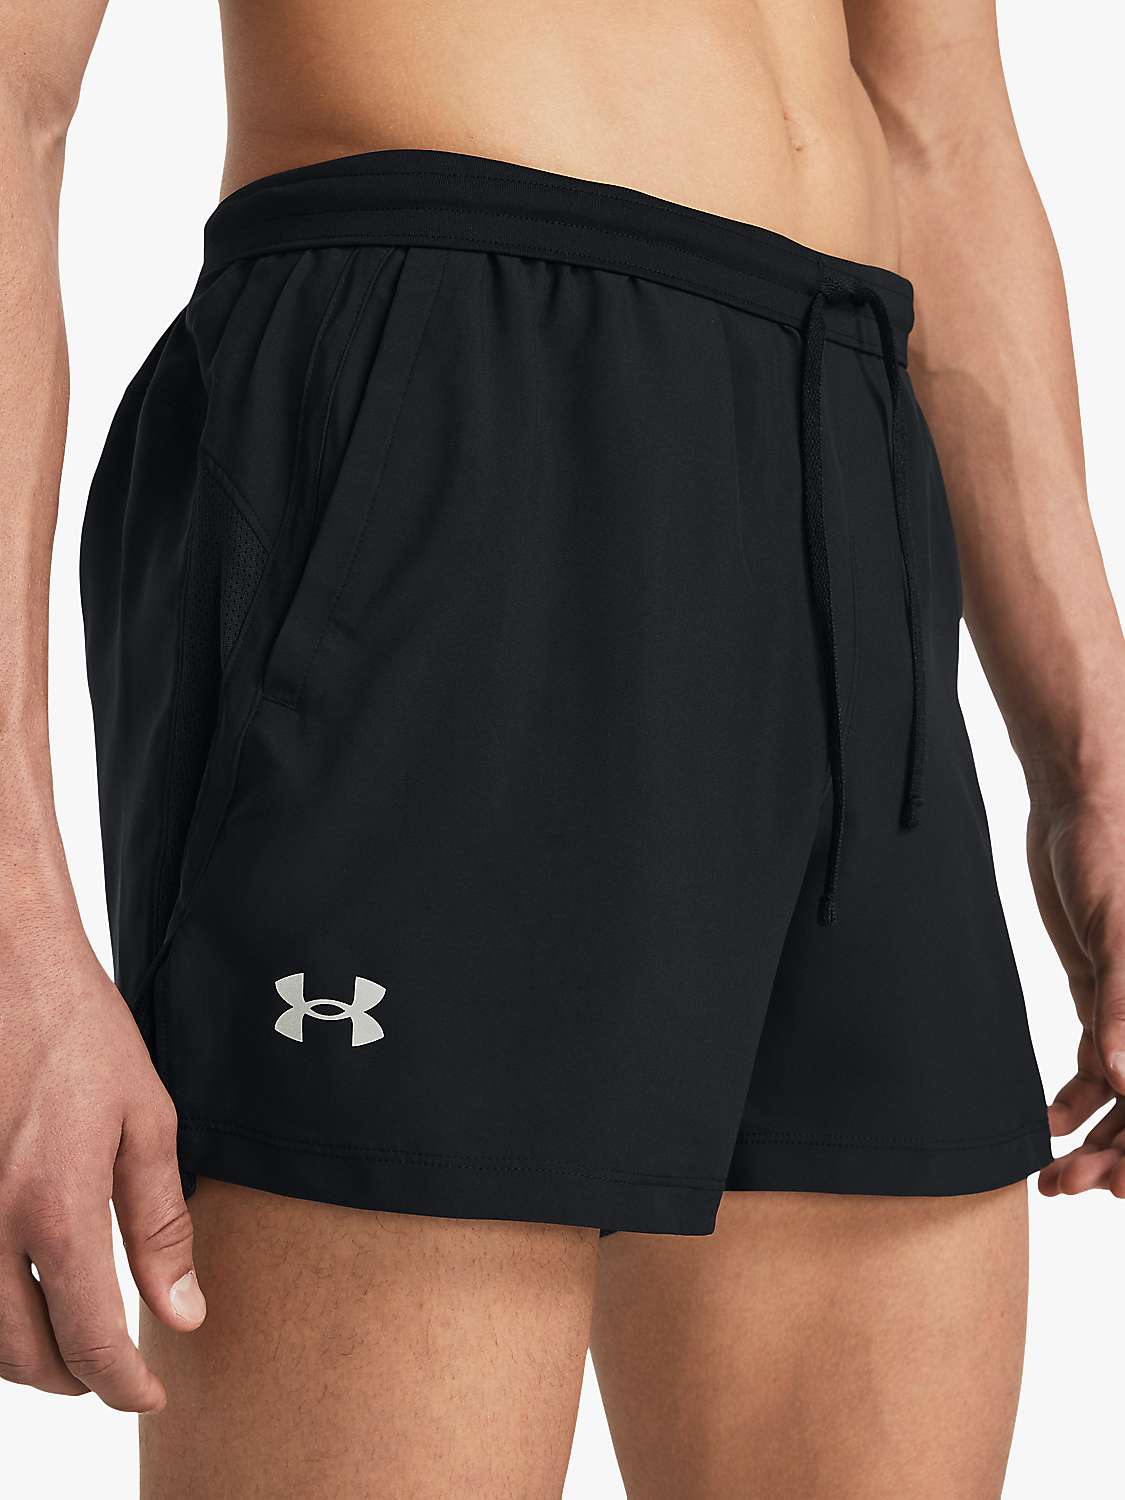 Buy Under Armour Launch Running Shorts Online at johnlewis.com